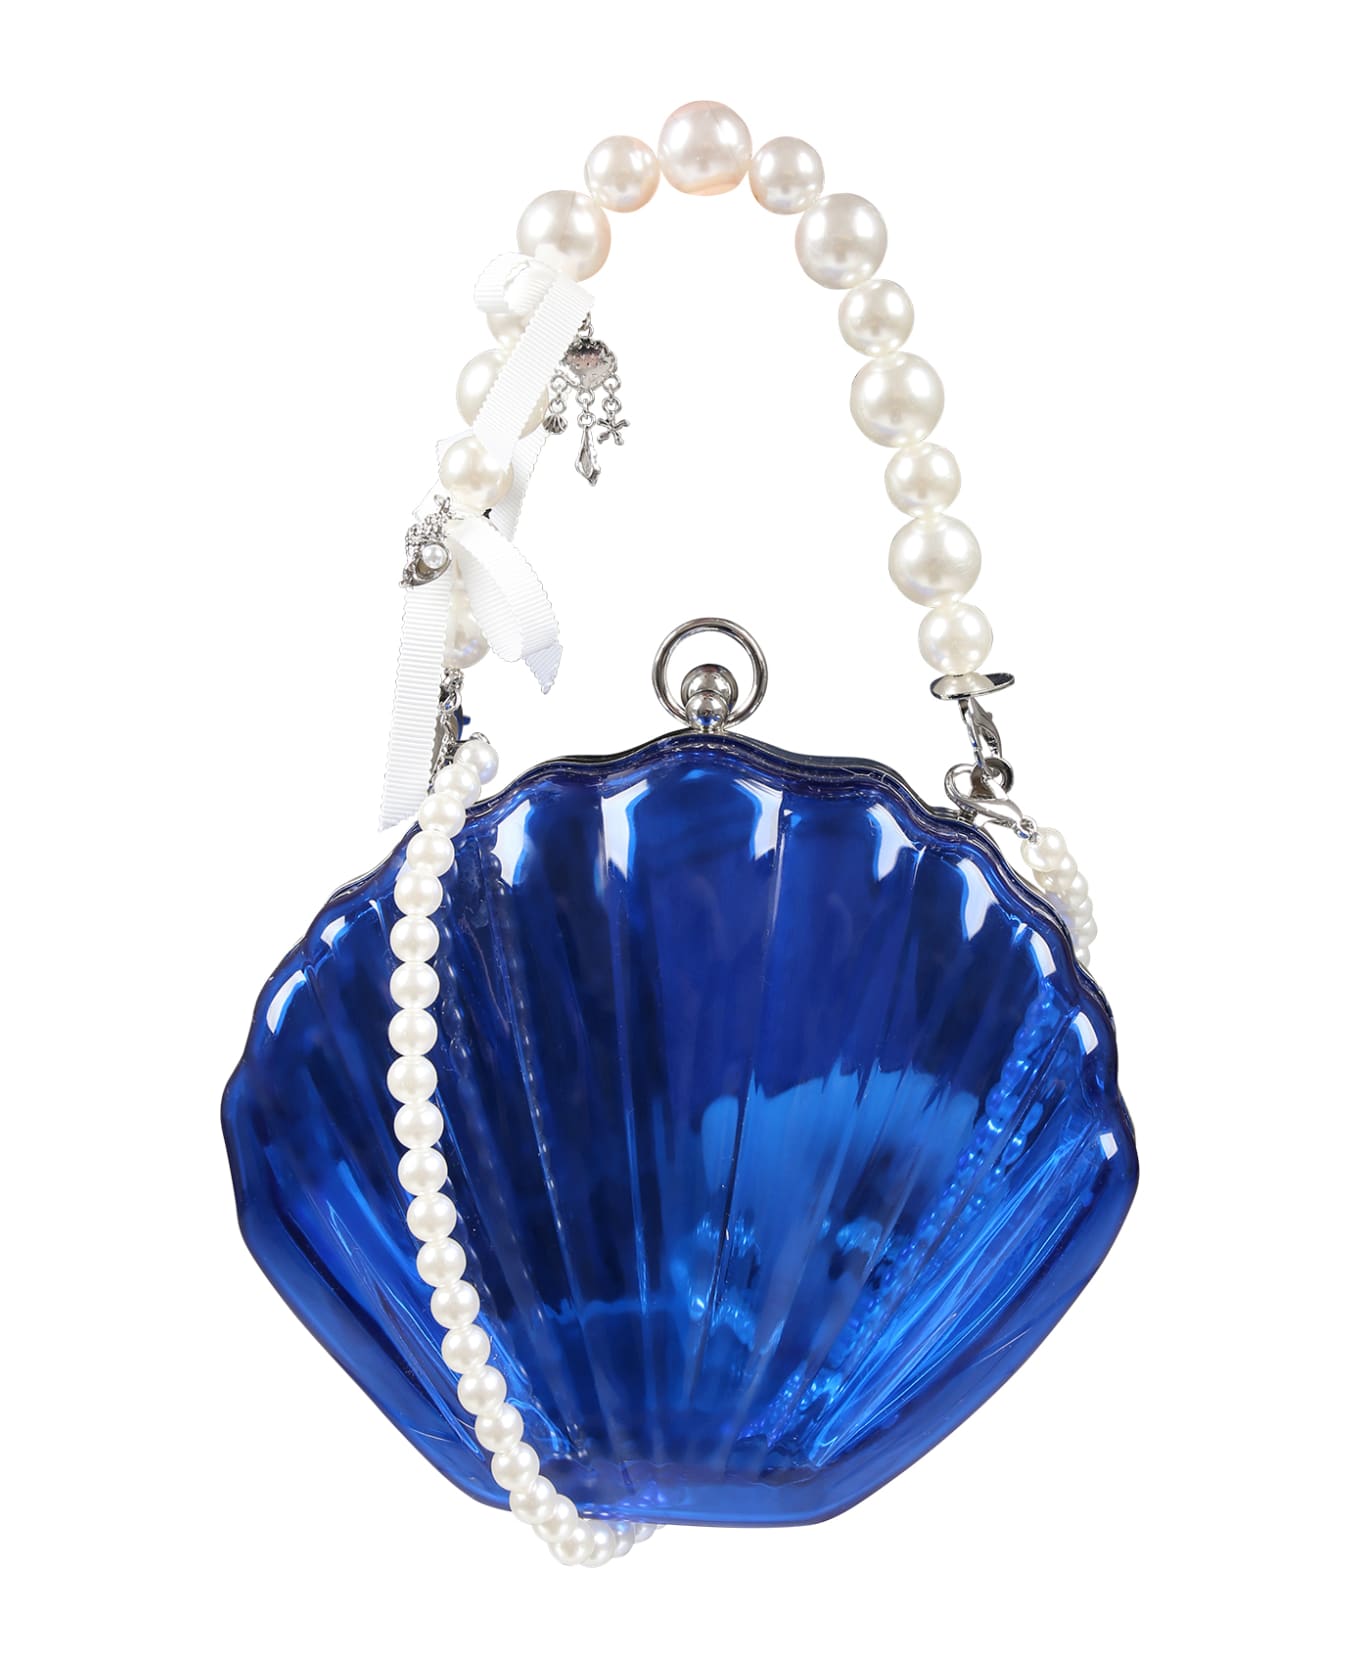 Monnalisa Blue Bag For Girl With Pearl And Shells - Blue アクセサリー＆ギフト